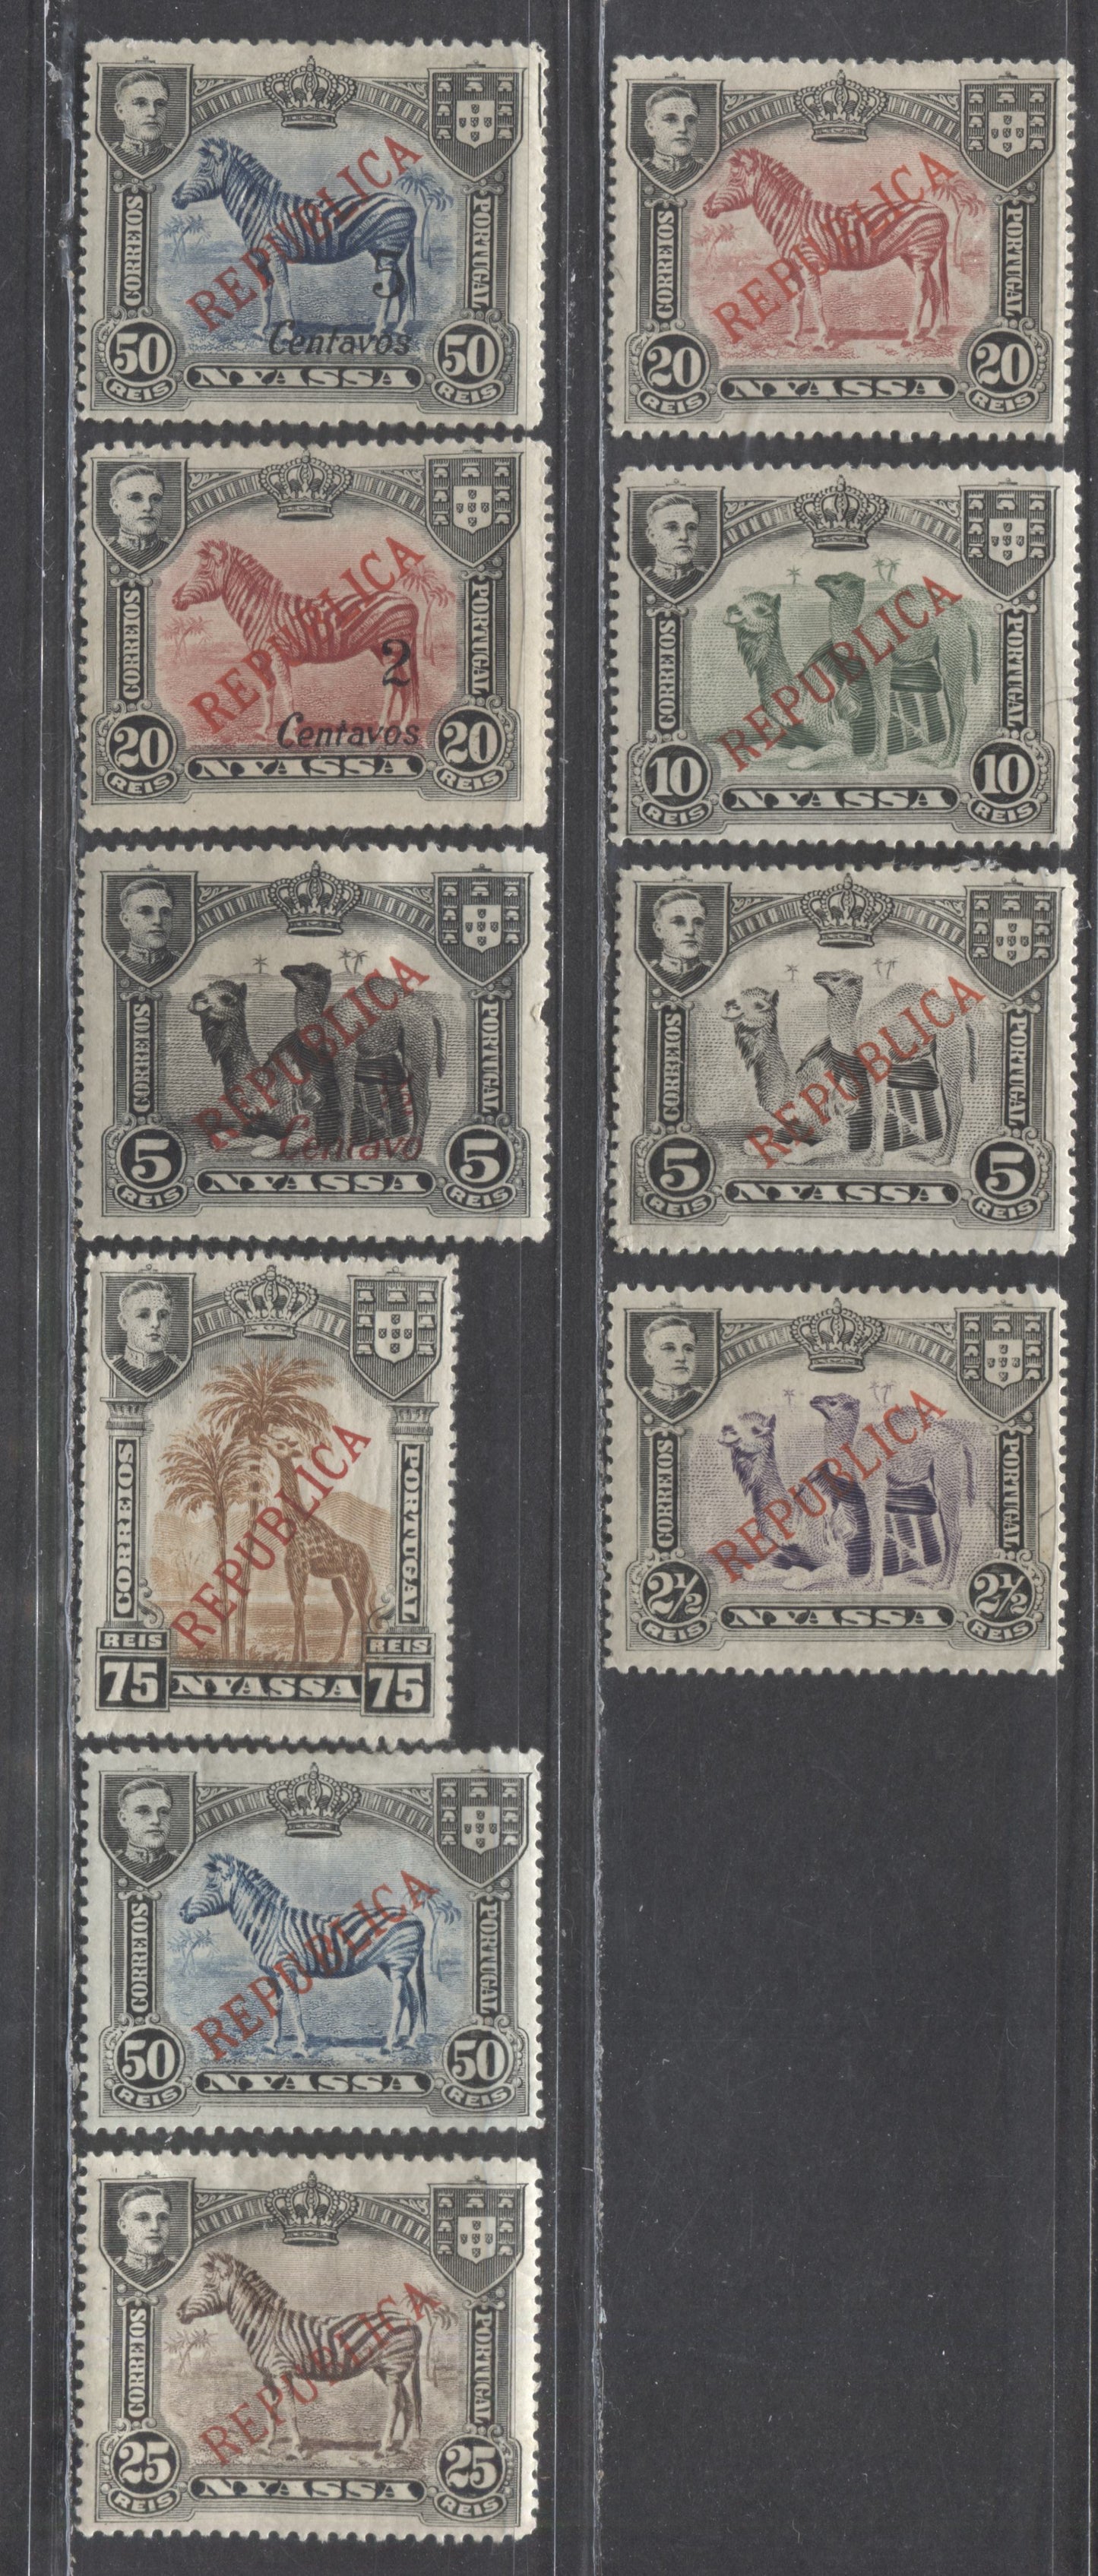 Lot 560 Nyassa SC#51/101 1911-1921 Republica and London Surcharges, 10 F/VF OG and Unused Singles, Click on Listing to See ALL Pictures, 2022 Scott Classic Cat. $18.8 USD